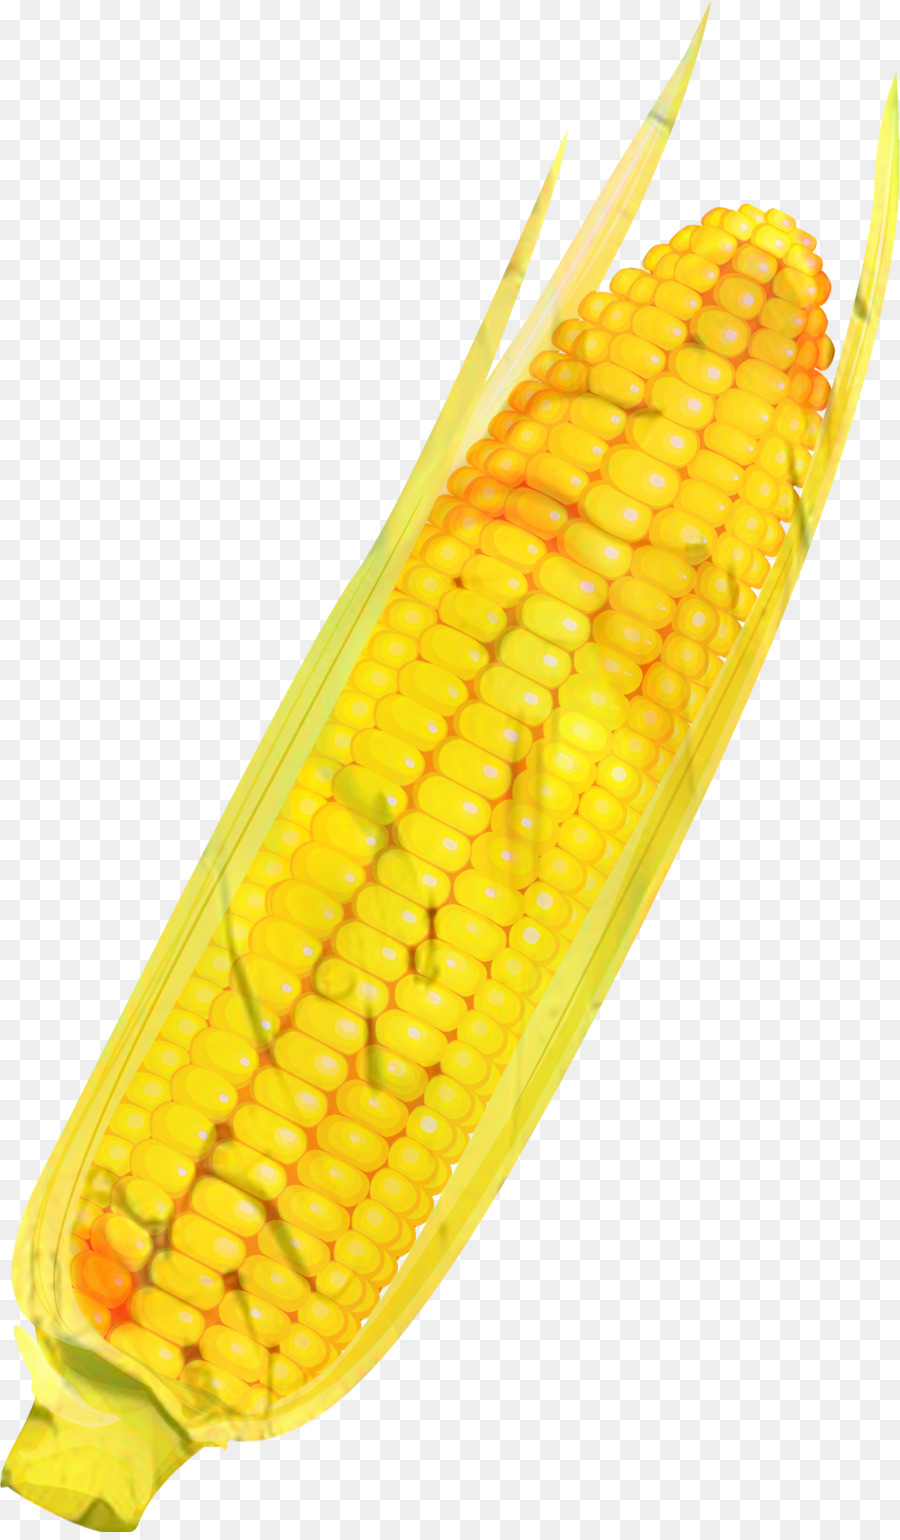 Corn on the cob Commodity -  png download - 1201*2044 - Free Transparent Corn On The Cob png Download.